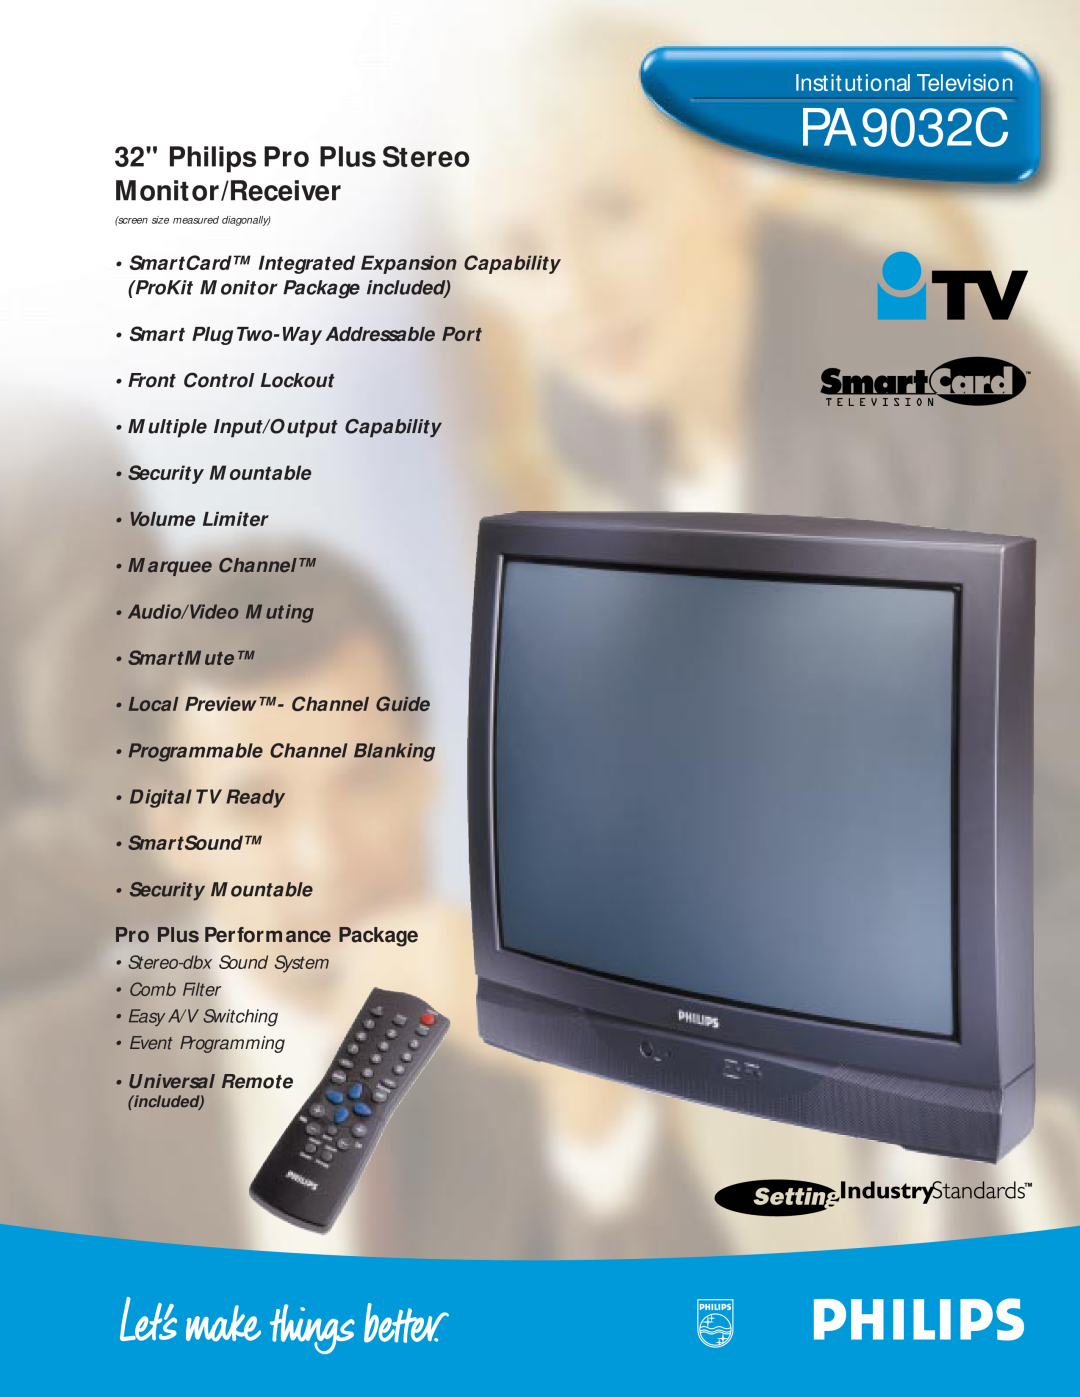 Philips PA9032C manual Institutional Television, Philips Pro Plus Stereo Monitor/Receiver, Pro Plus Performance Package 